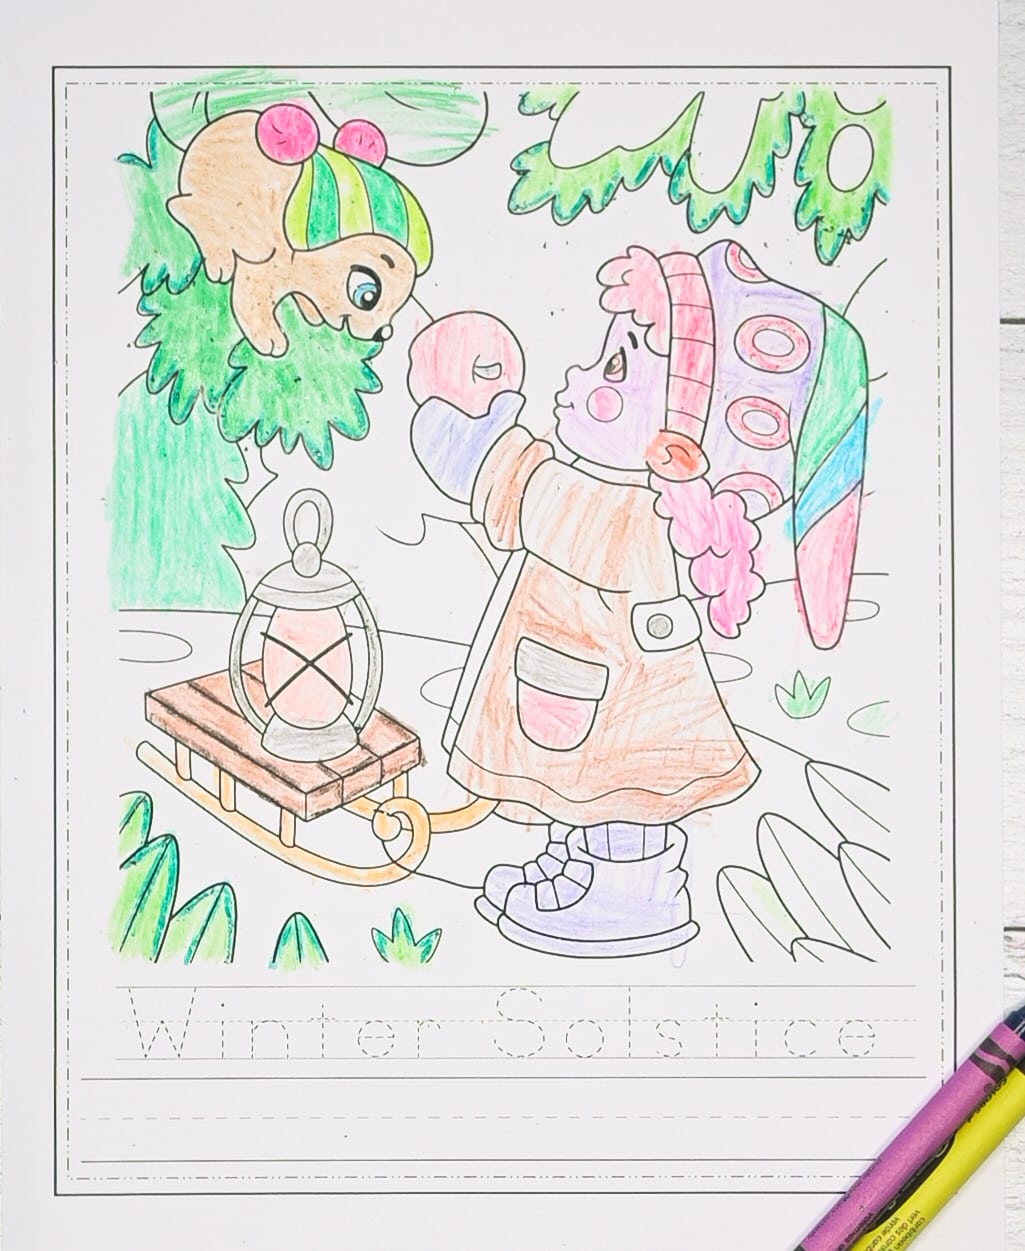 A colored in picture of a winter gnome girl standing above the words "Winter Solstice" in a dotted font to trace.